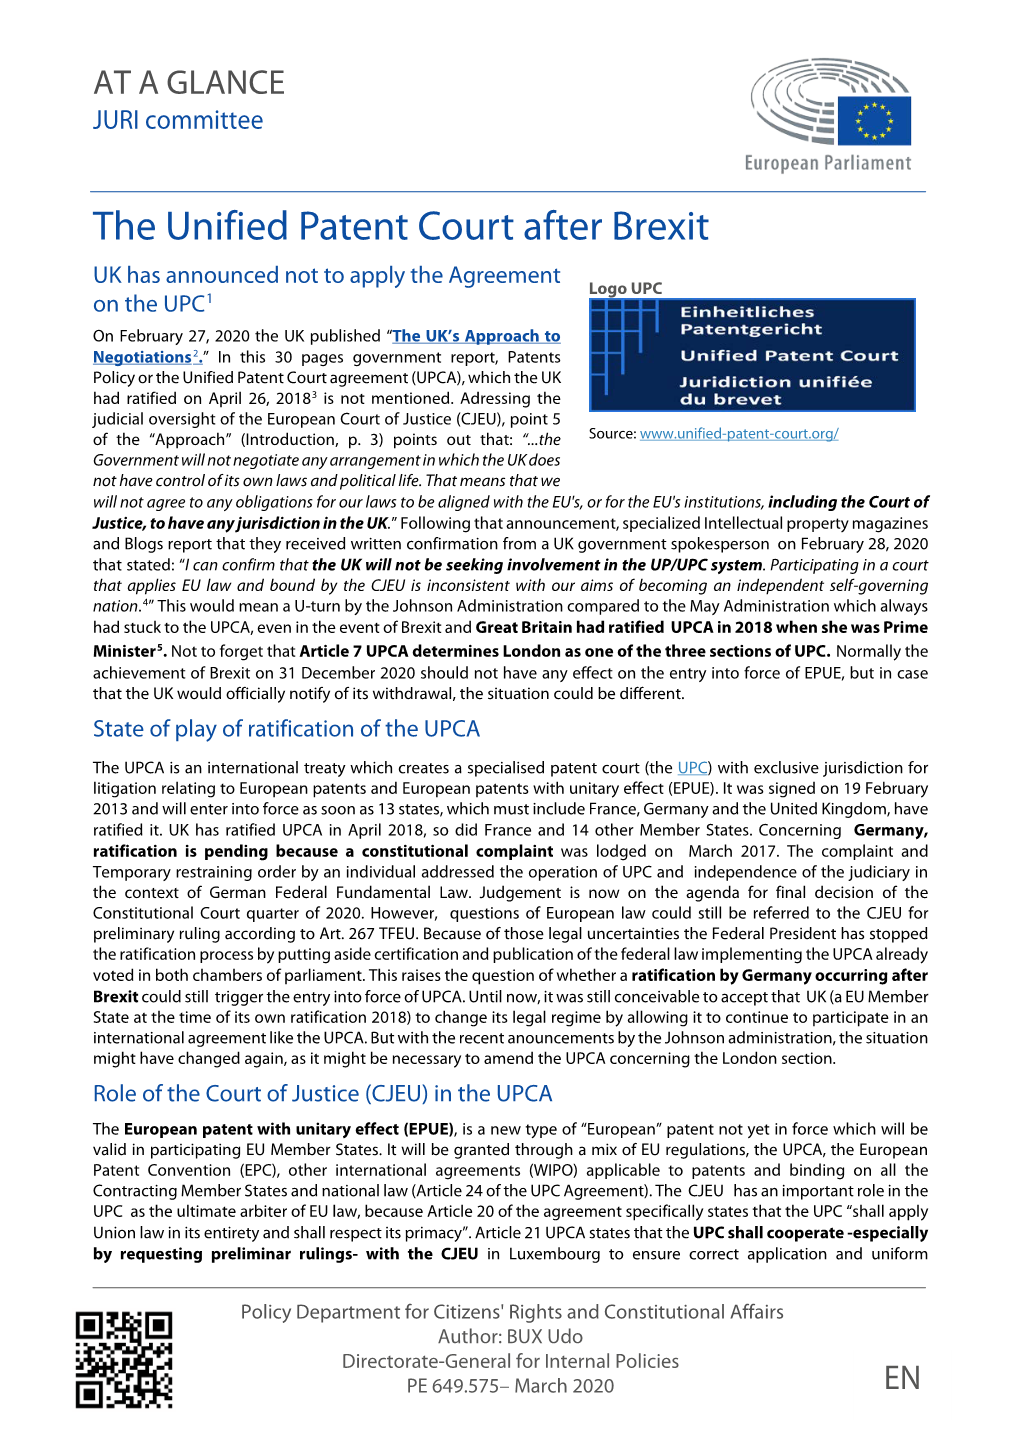 JURI Committee the Unified Patent Court After Brexit